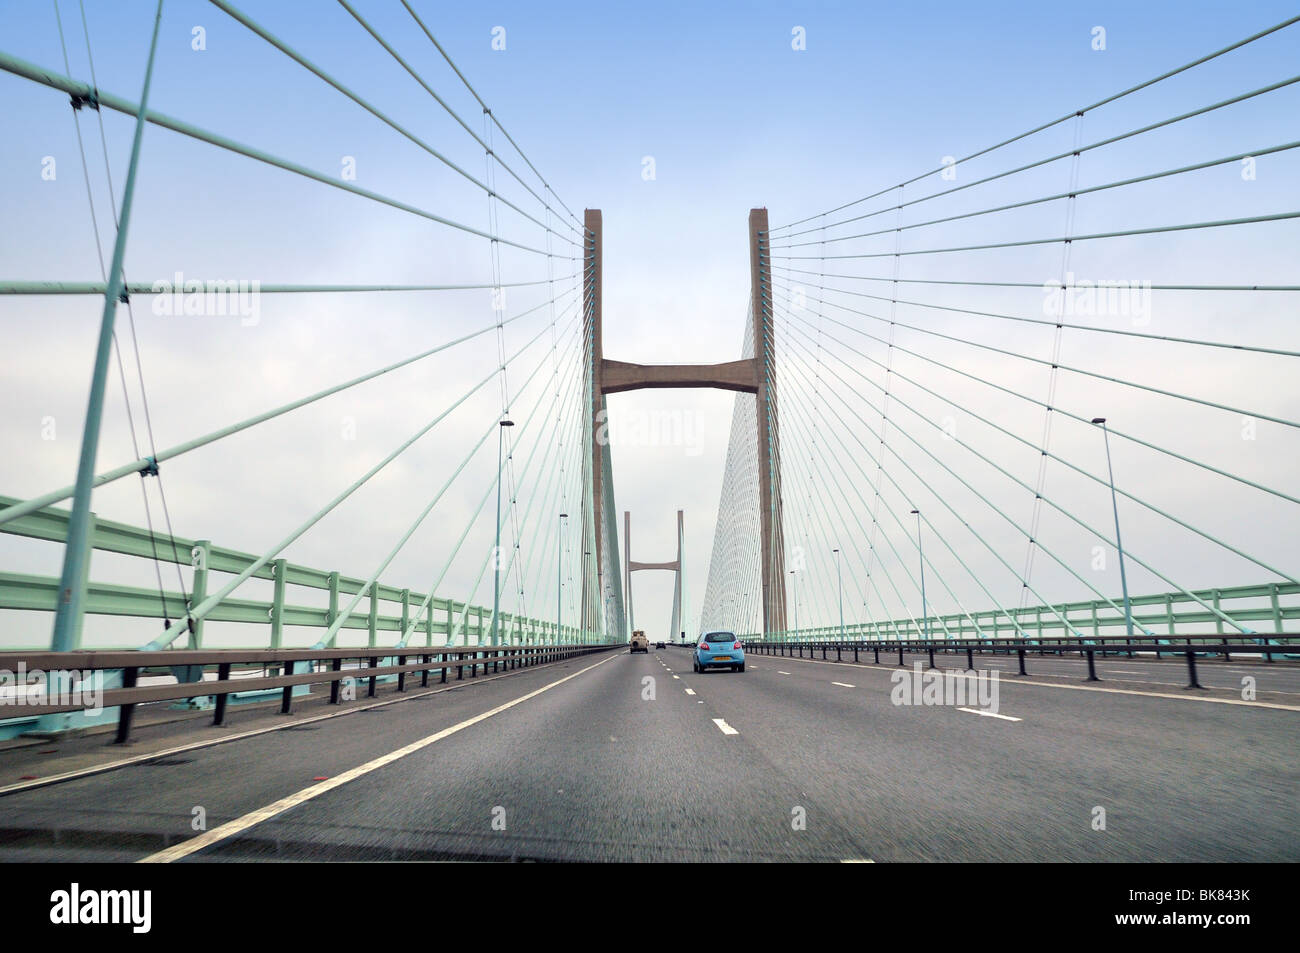 Prince of Wales bridge,the second Severn road bridge between England and Wales, UK Stock Photo